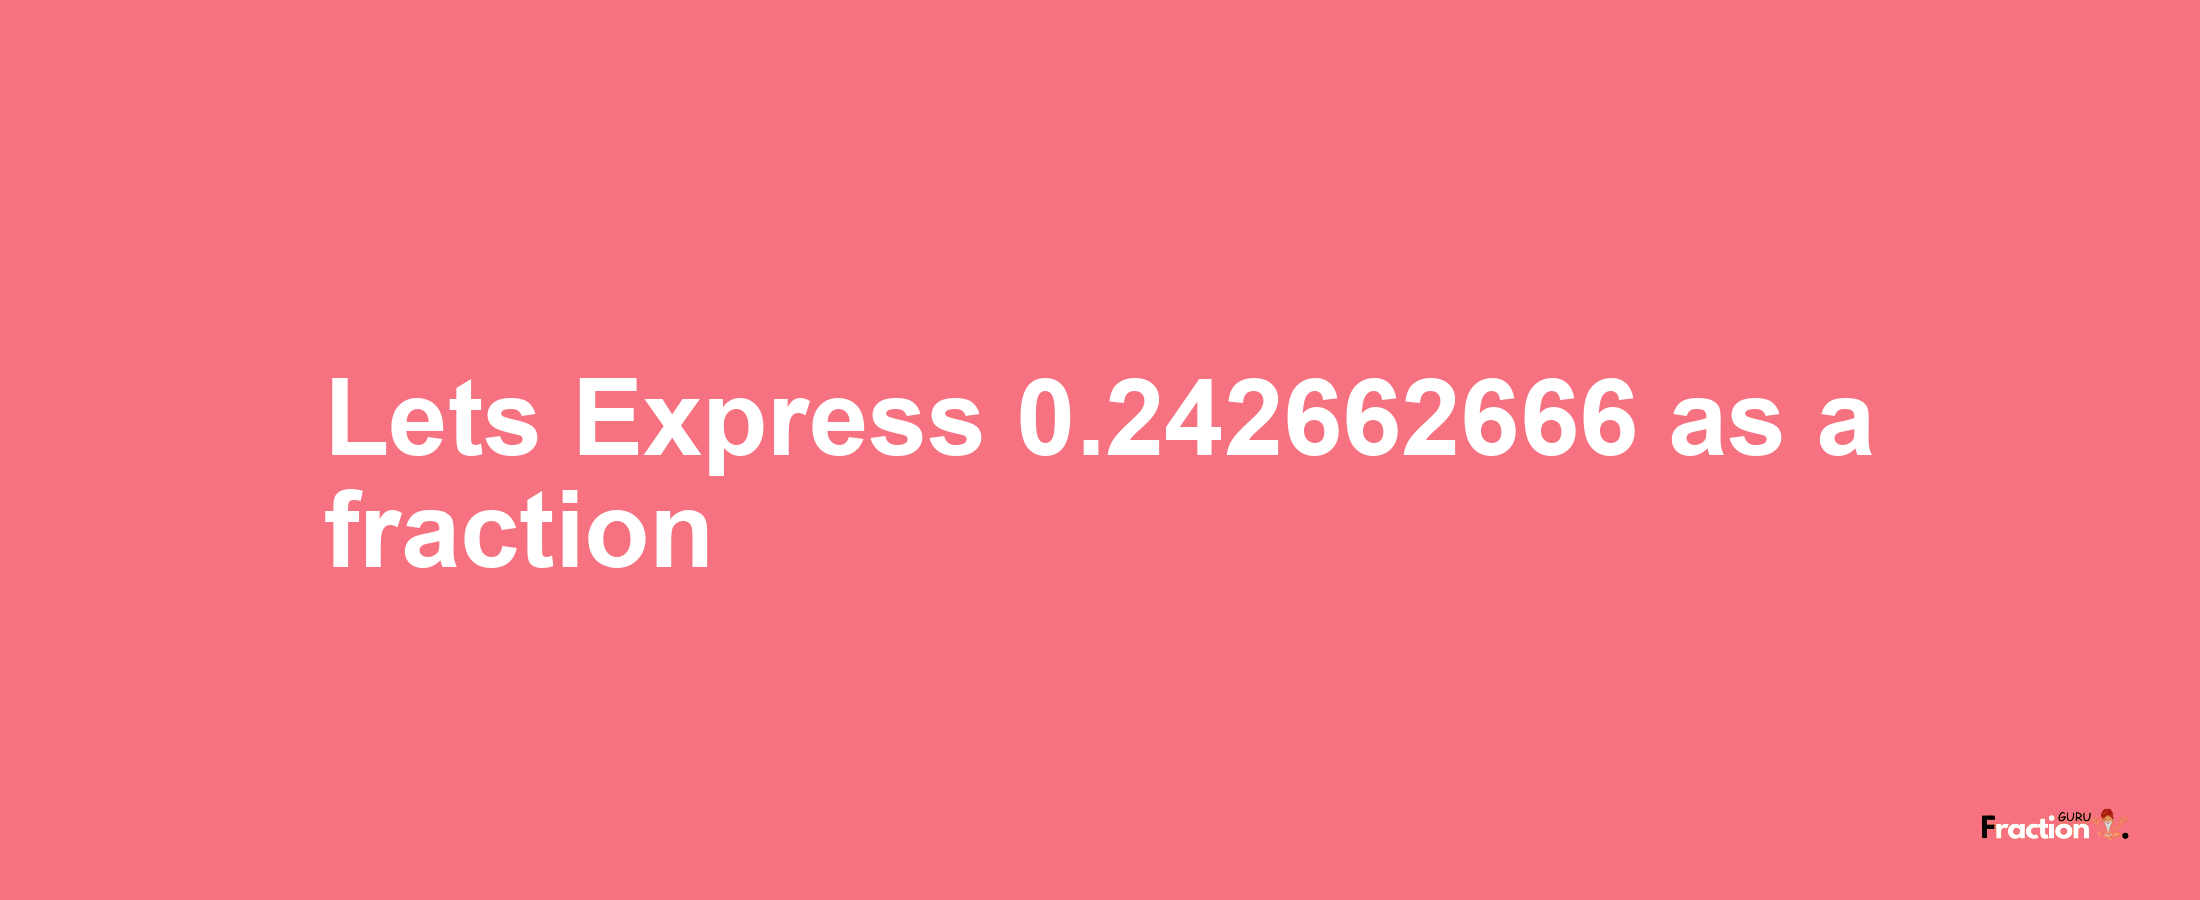 Lets Express 0.242662666 as afraction